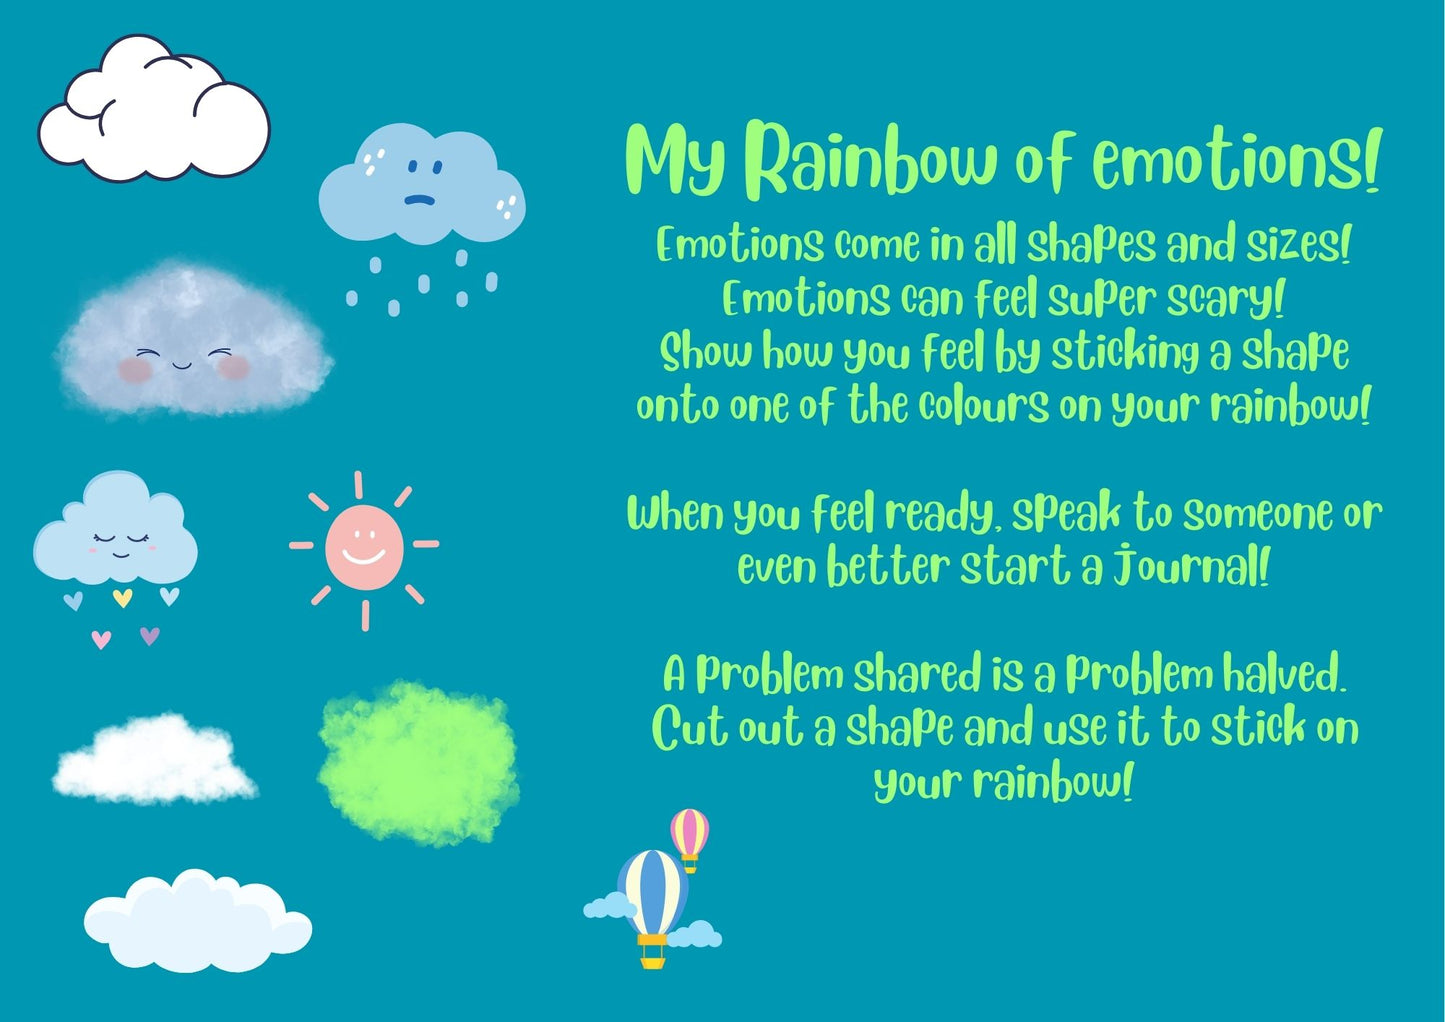 Rainbow feelings chart, Support mechanism for promoting positive reinforcement